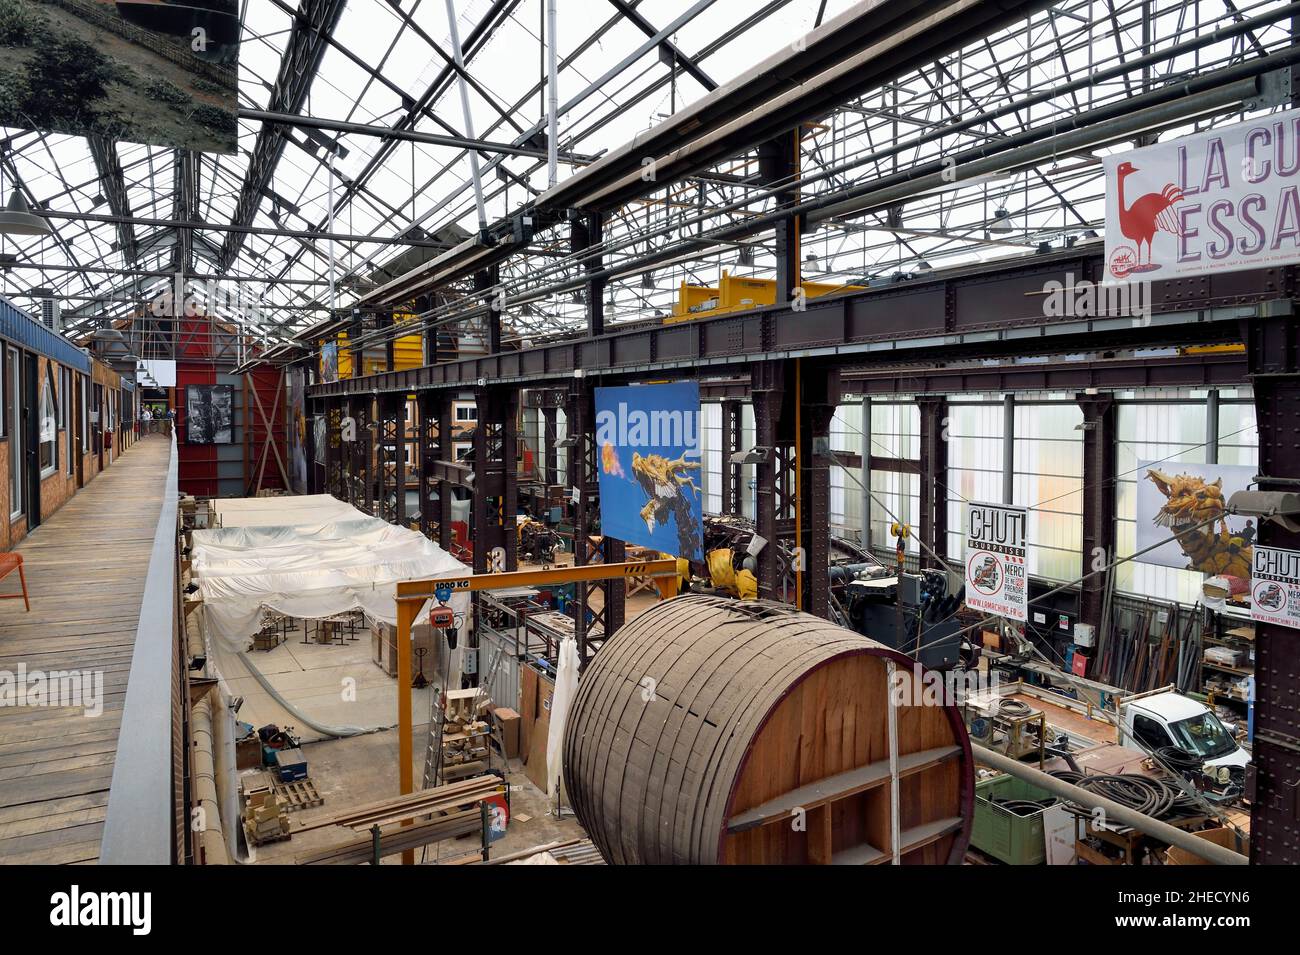 France, Loire-Atlantique, Nantes, gallery of the Machines de l'Ile in the hangars of former shipyards, an artistic project created by Fran?ois Delaroziere and Pierre Orefice, workshop of the Compagnie La Machine Stock Photo